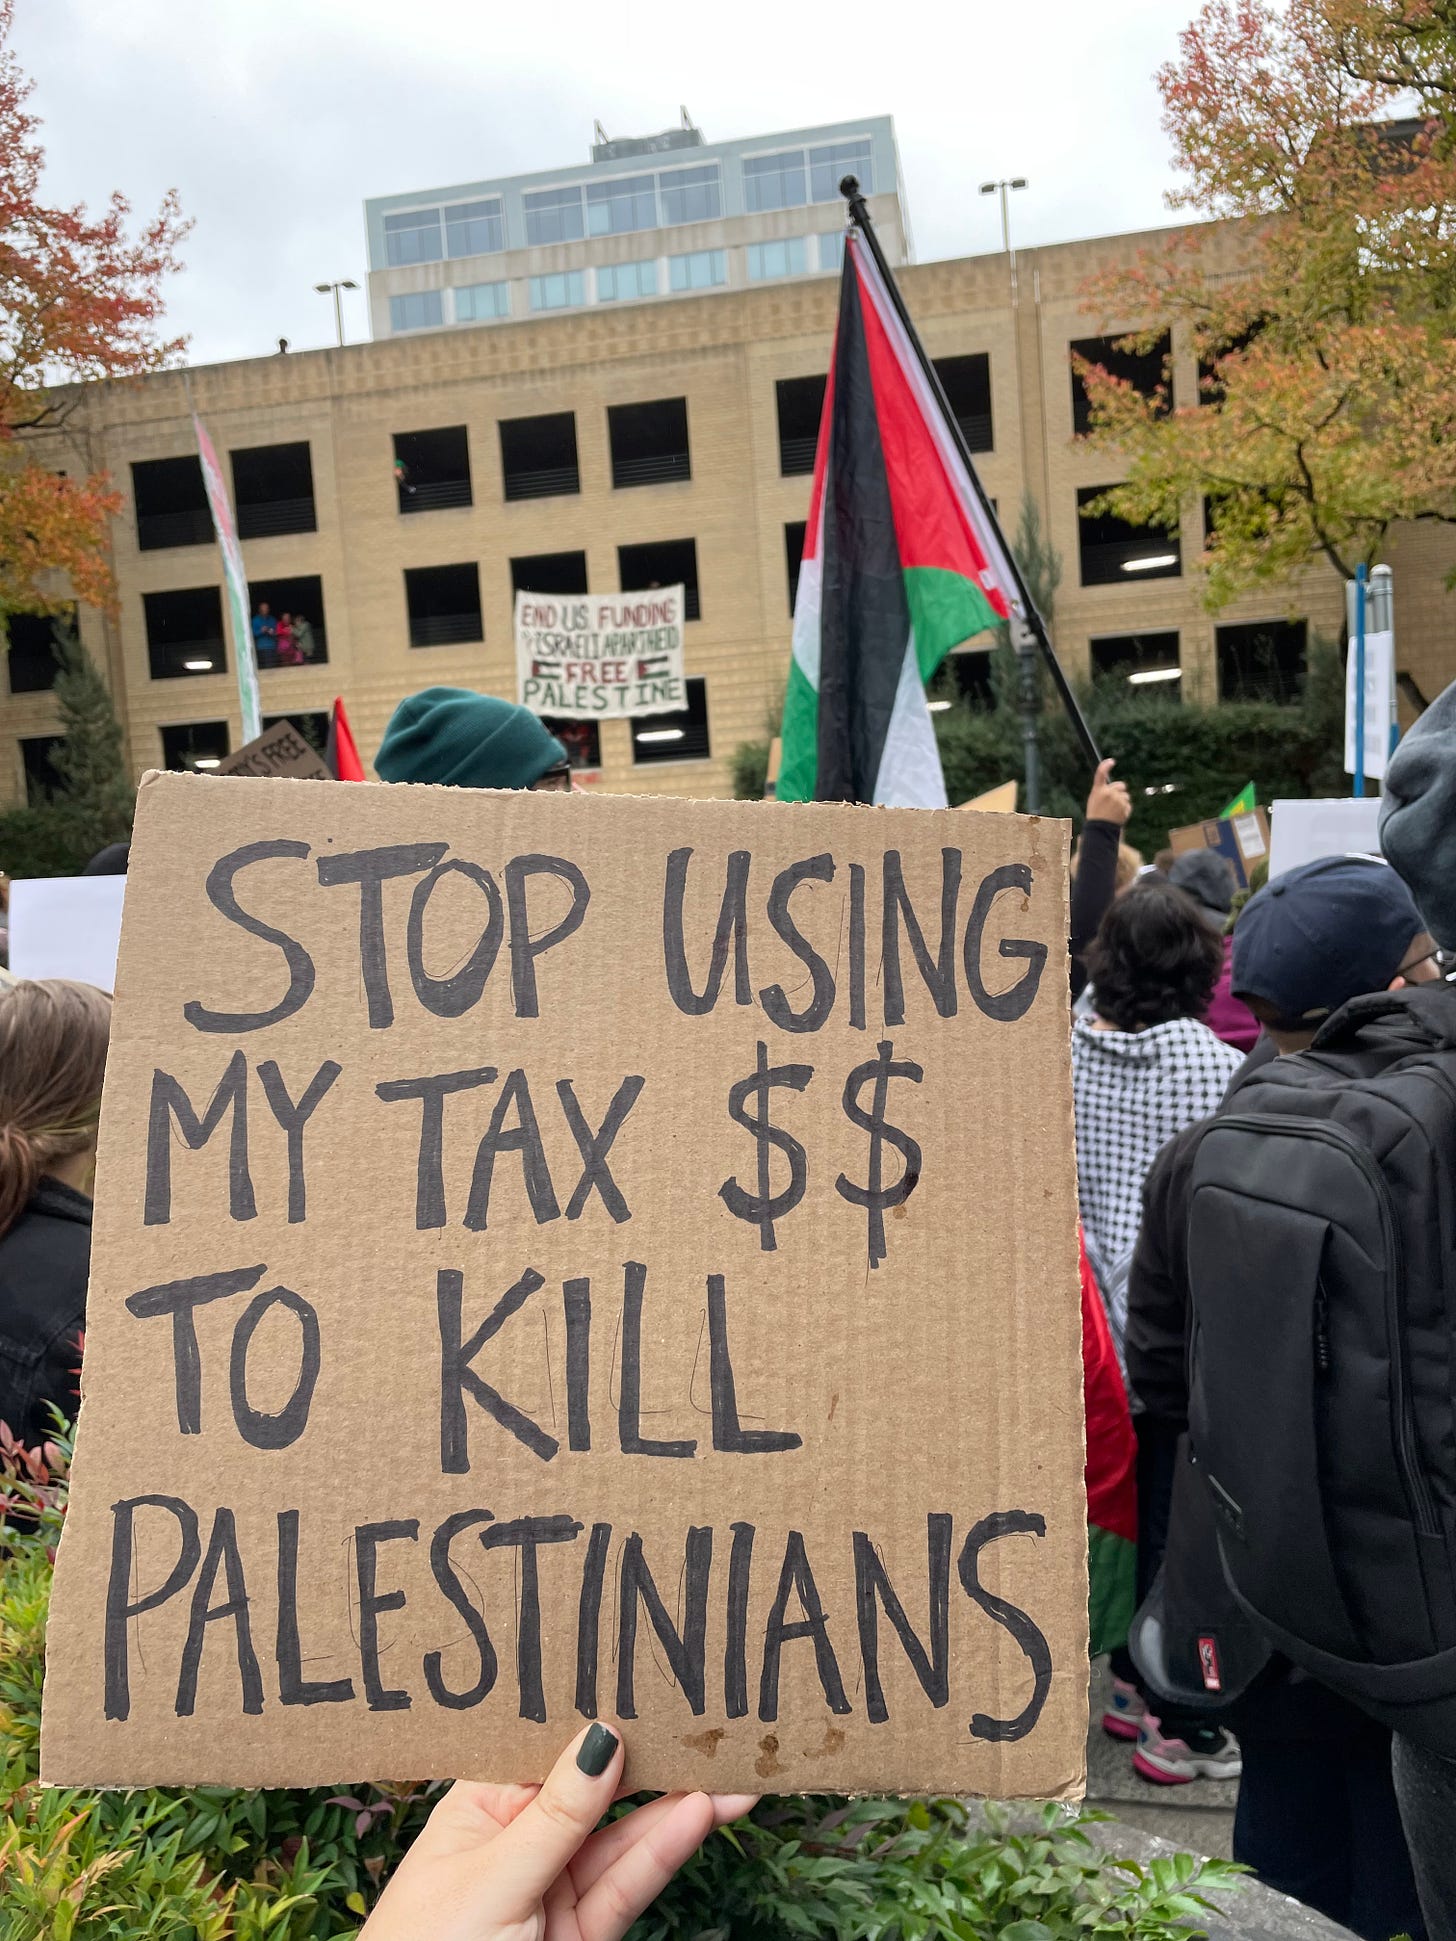 outside in POrtland ORegon in front a huge parking structure, people are wearing hats and beanies and holding up signs and palestinian flags. A cardboard sign is in the foreground and it says stop using my tax $$ to kill palestinians